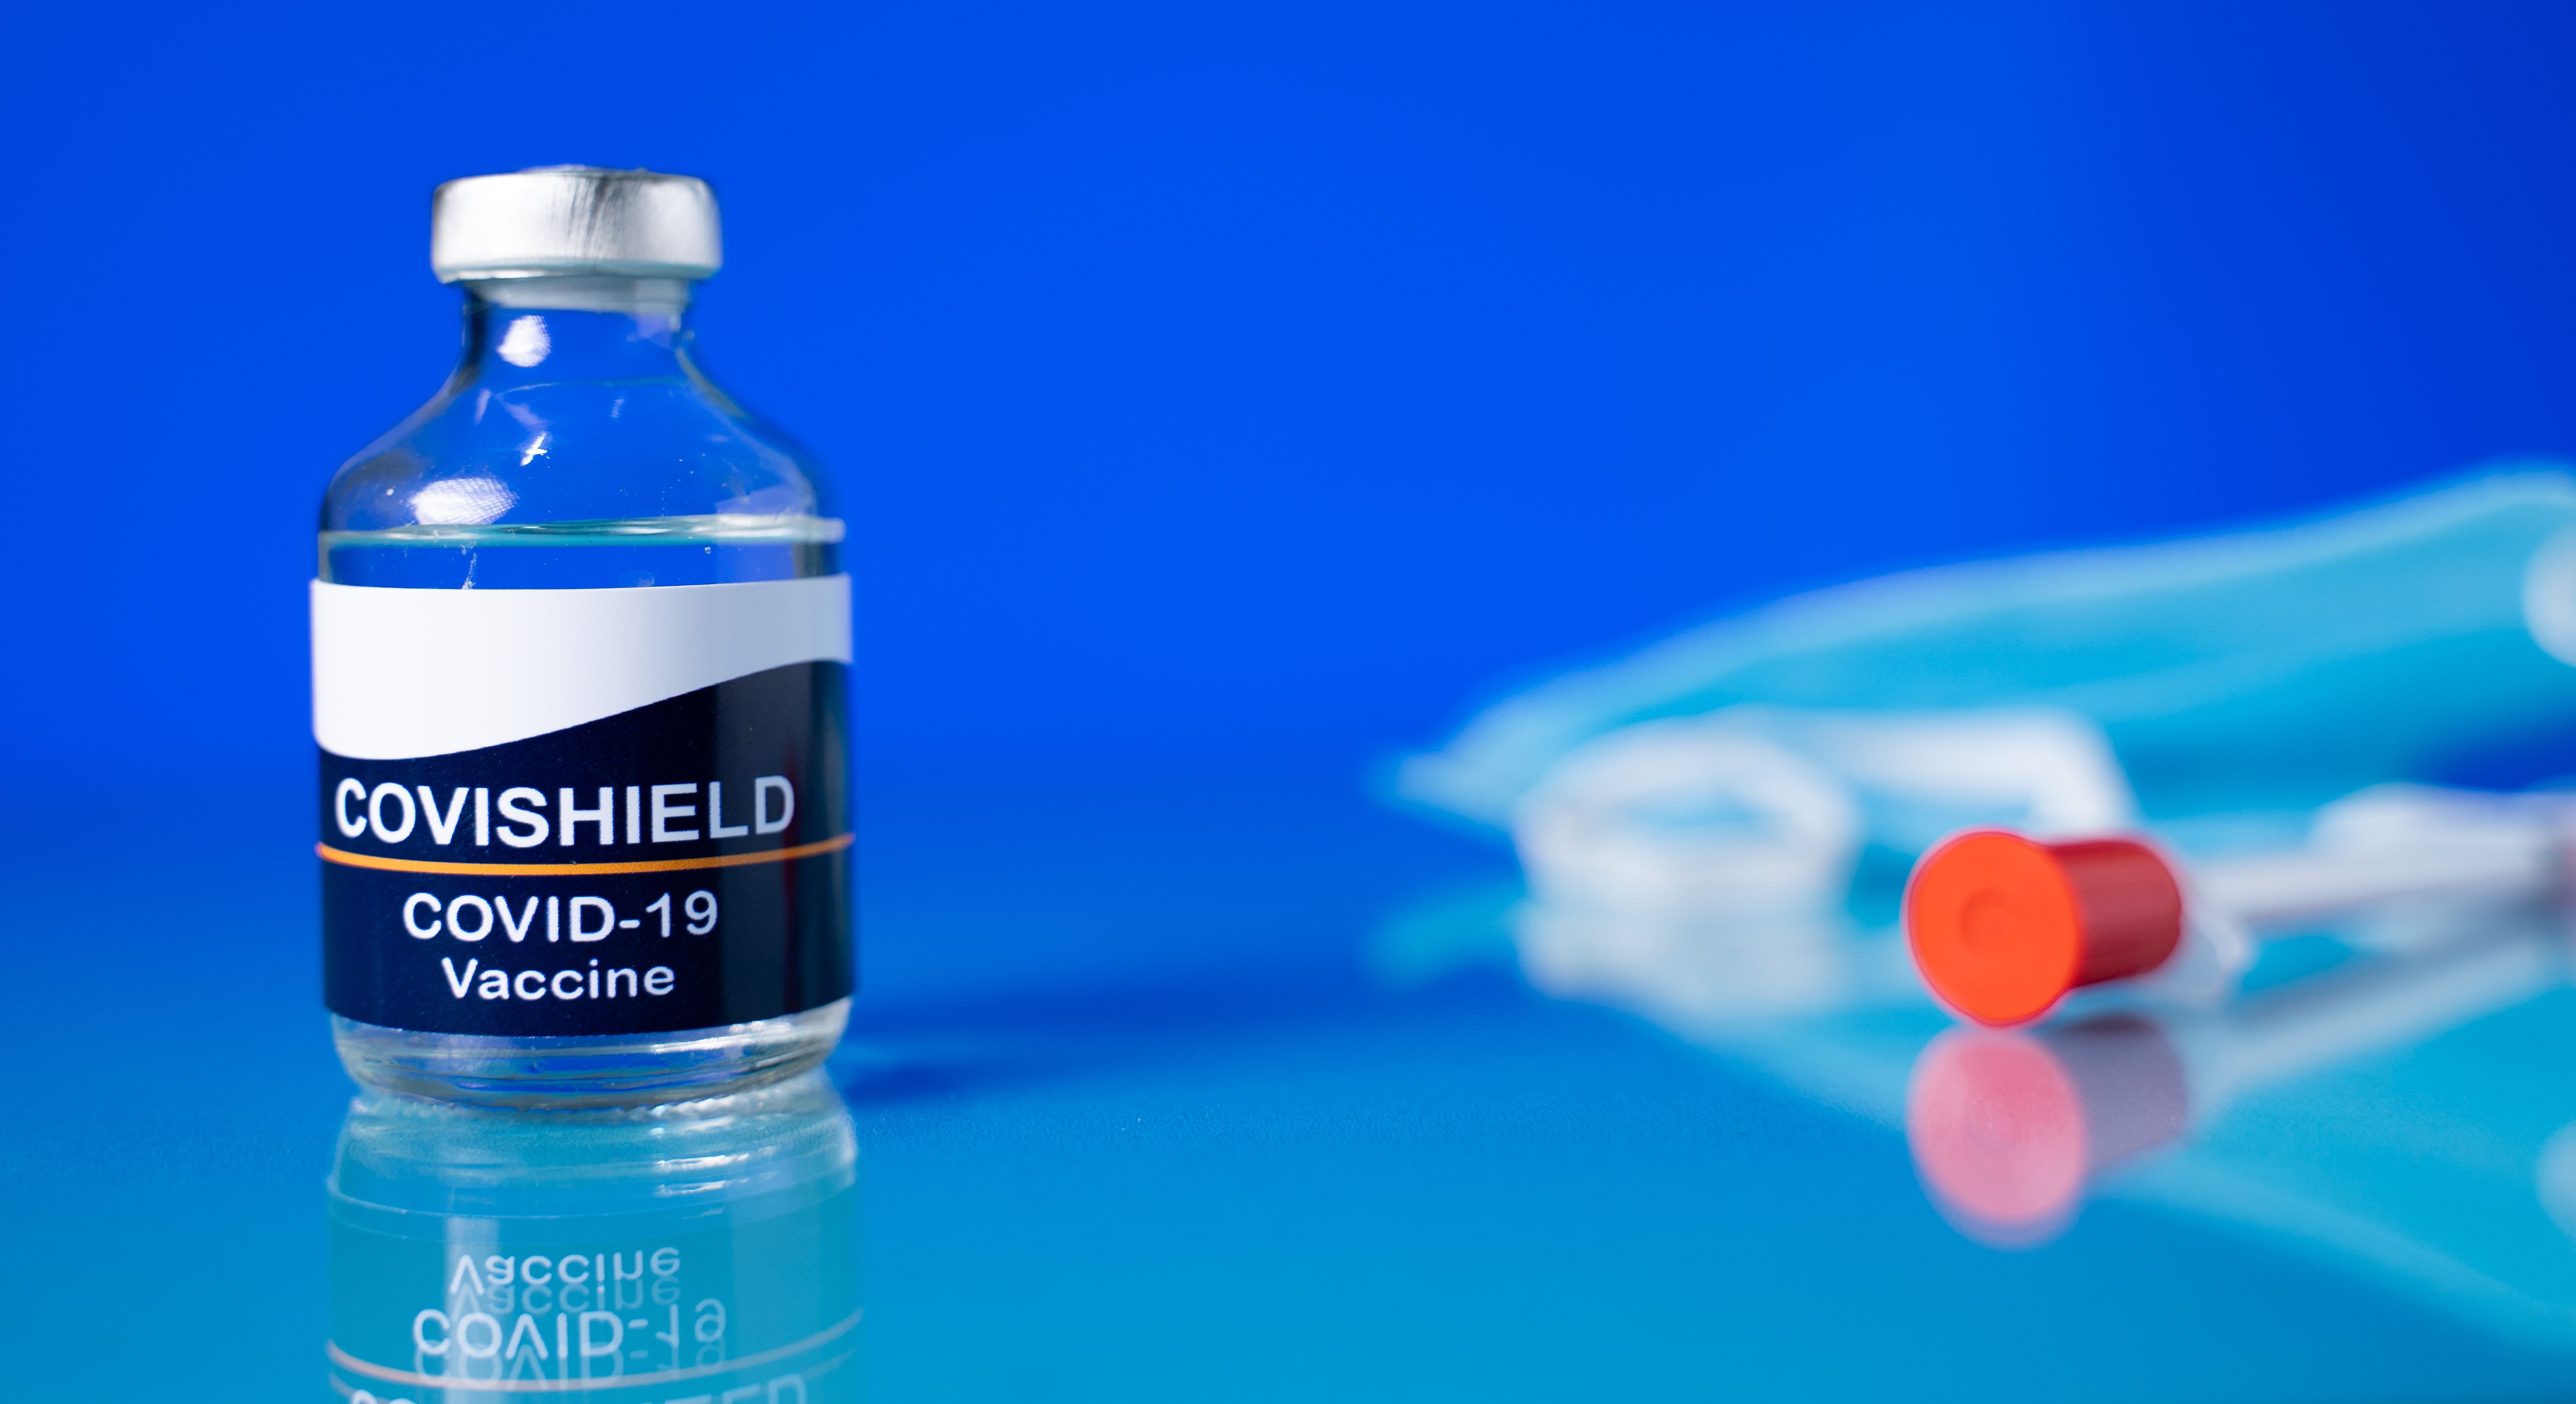 A mock-up of the Serum Institute of India's Covishield vaccine. Image by lakshmiprasada S / Shutterstock. India, 2020.